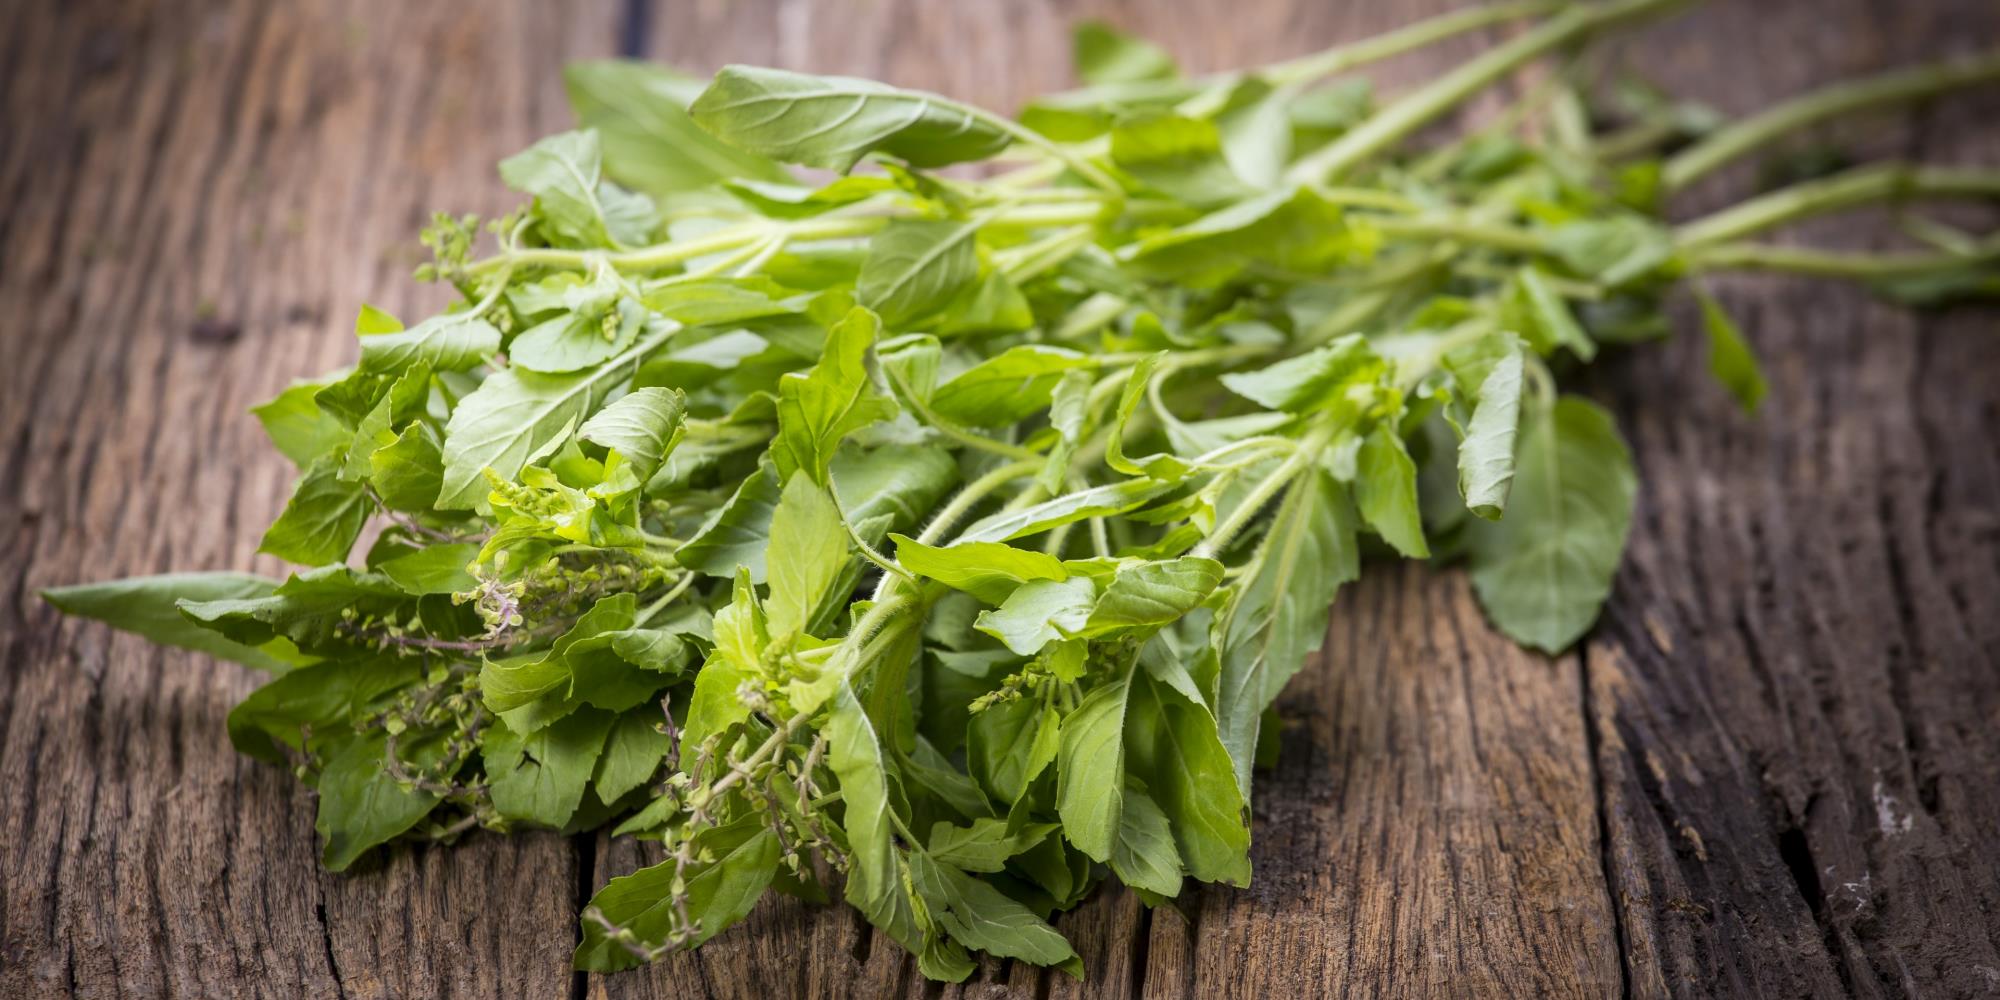 Basil vs Holy Basil - What's the difference?